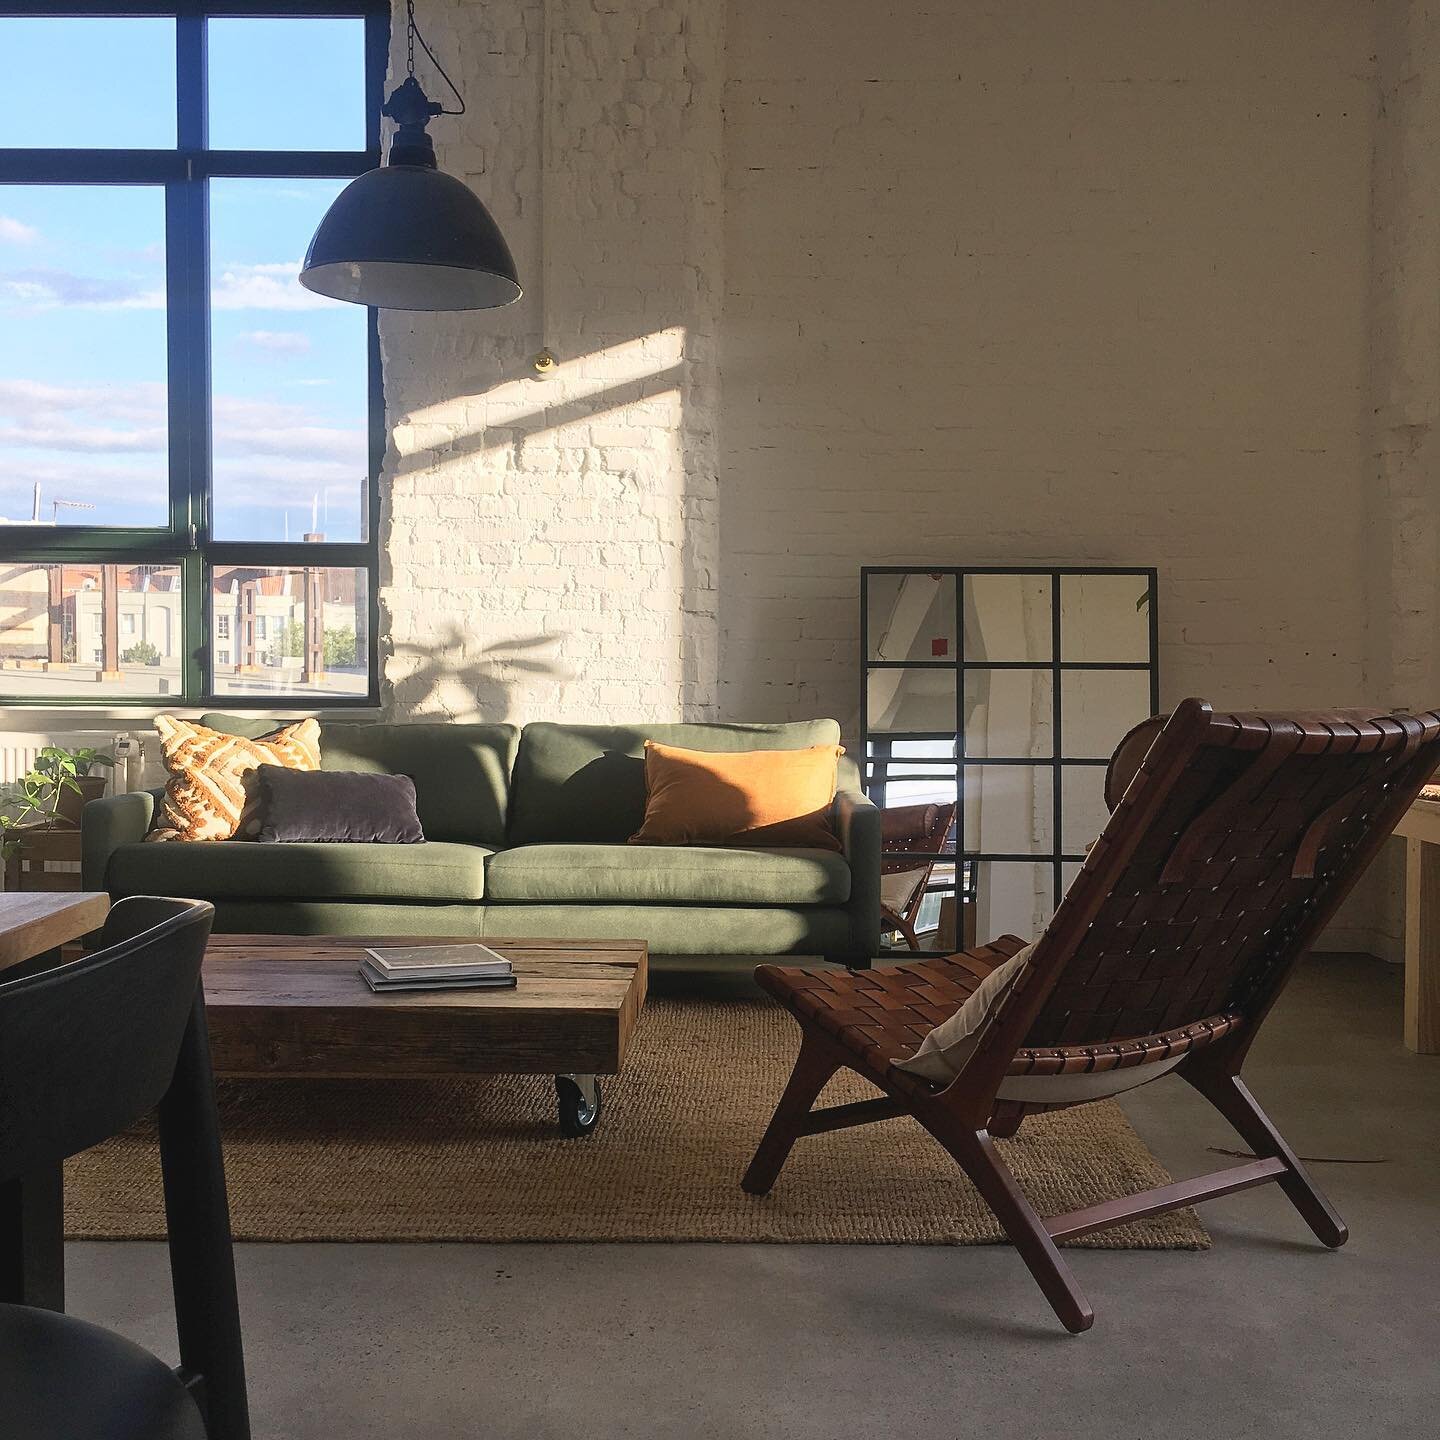 Late summer sun, on the &bdquo;green sofa&ldquo;: made from 98% recycled plastic bottles #ecosia #sustainbledesign #officedesign #oldfactory #loftoffice #industrialdesign